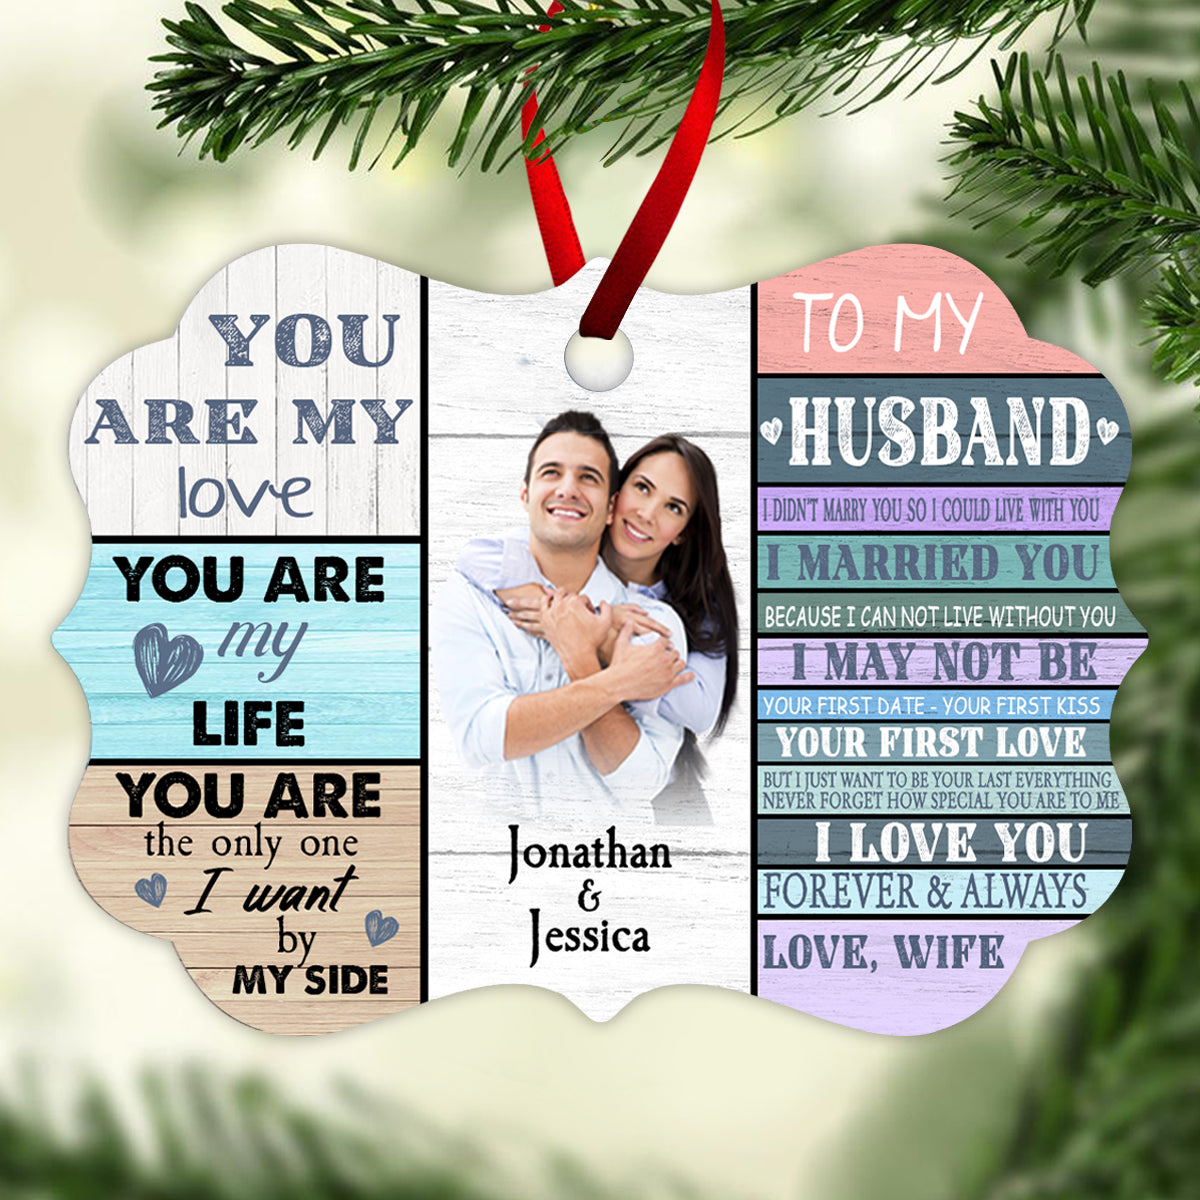 To Husband Your Last Everything - Personalized Ornament - Gift For Husband, Couple